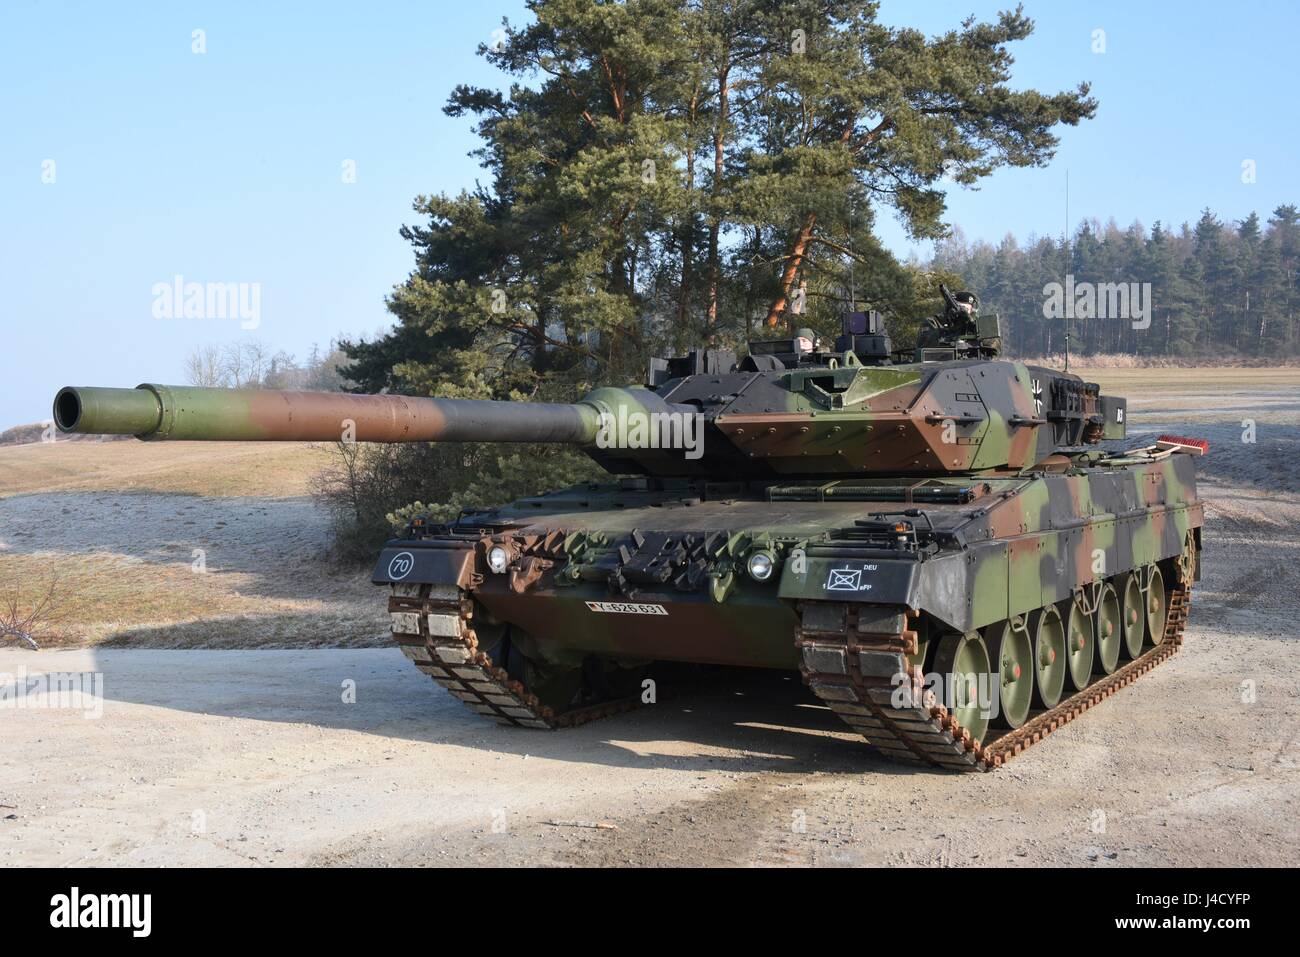 Leopard 2A6 main battle tank of Panzerbataillon 104 before the deployment  to Lithuania as part of the NATO initiative enhanced Forward Presence  (eFP). The Bundeswehr deployed six Leopard 2A6 MBTs to support